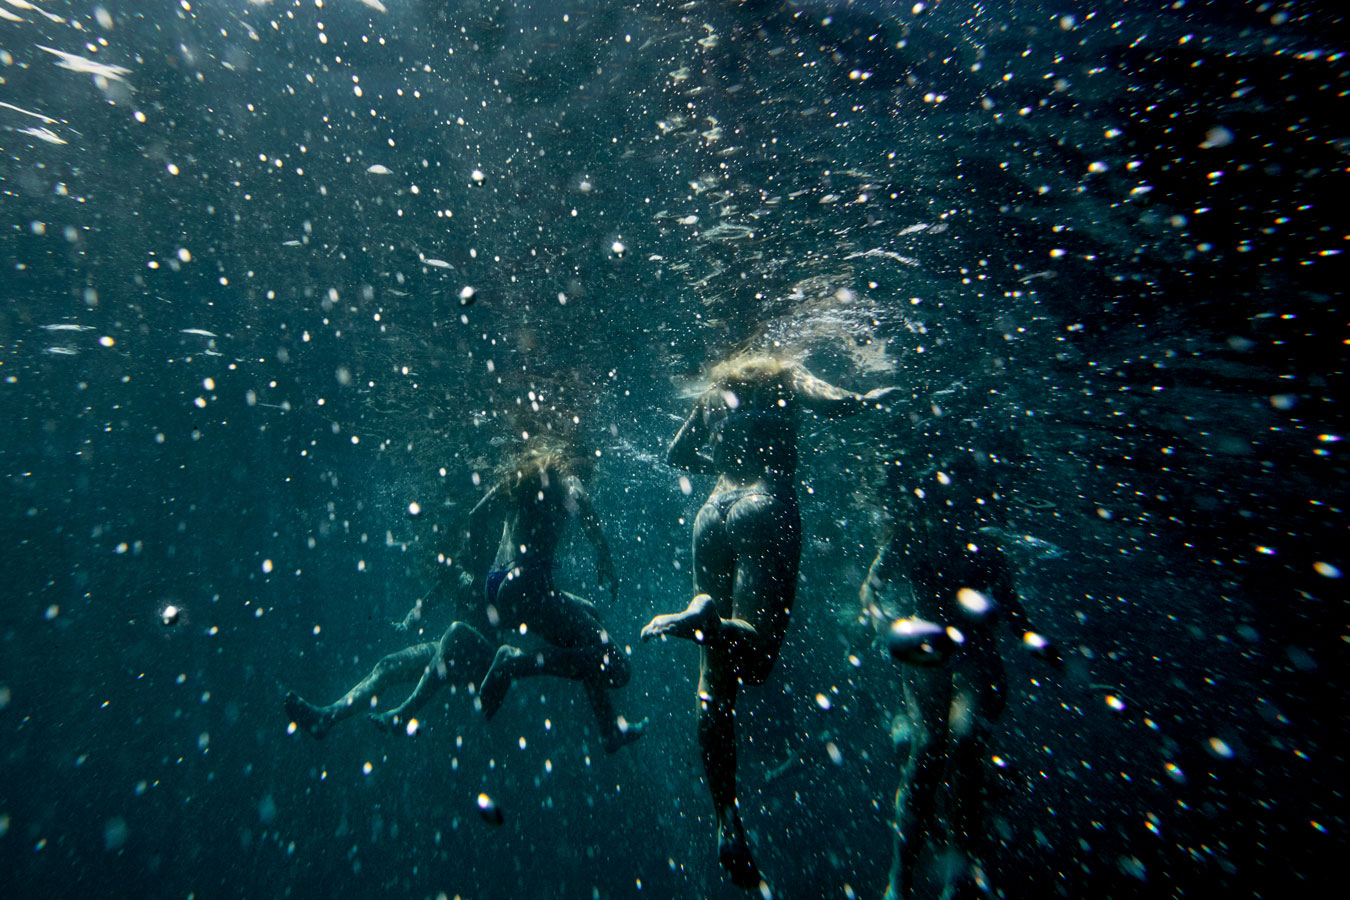 several-people-kicking-to-stay-boyant-underwater-you-can-see-legs-under-feet-in-dark-turquoise-bubble-space